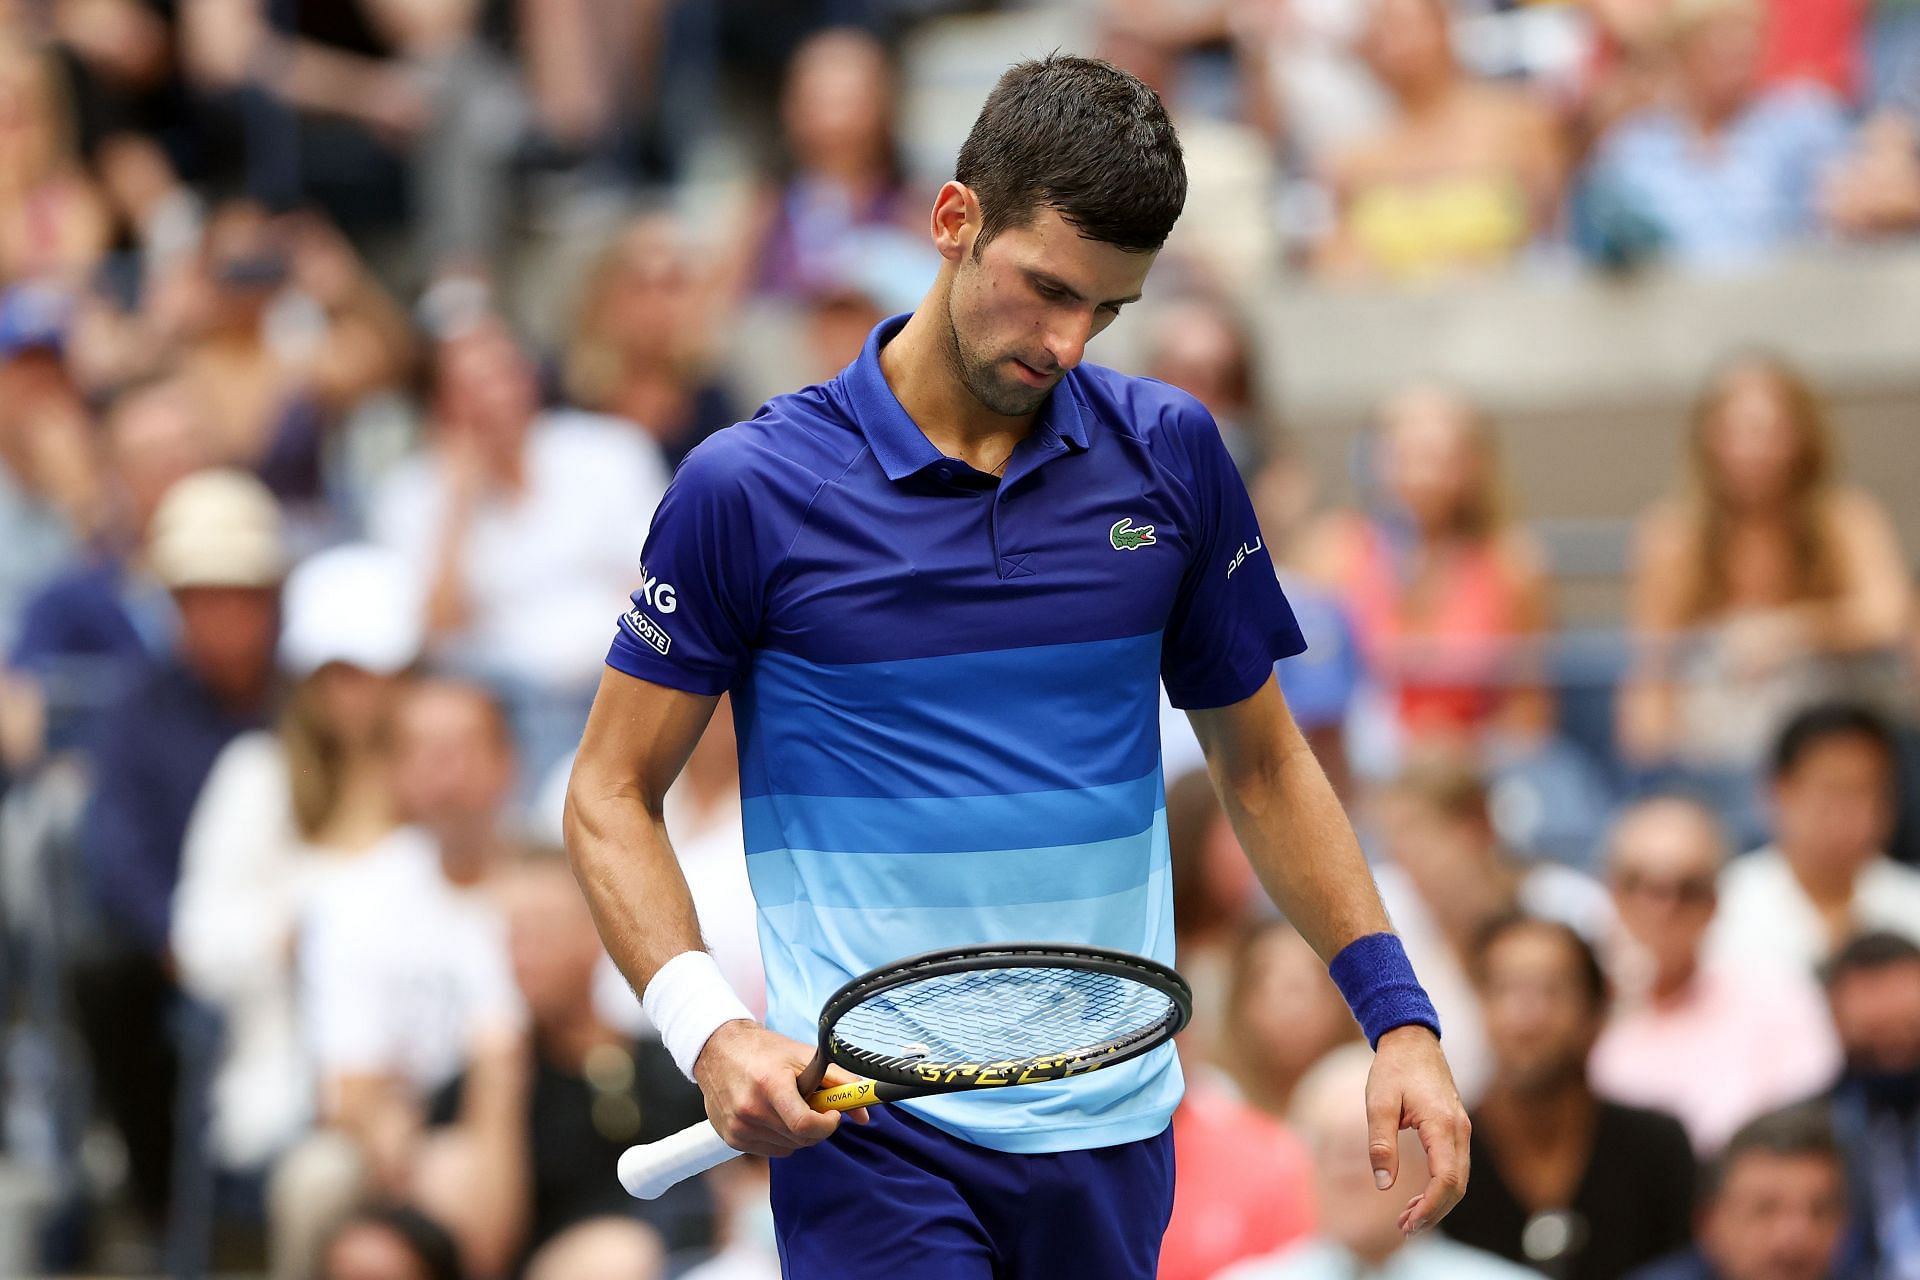 Novak Djokovic in action at the 2021 US Open